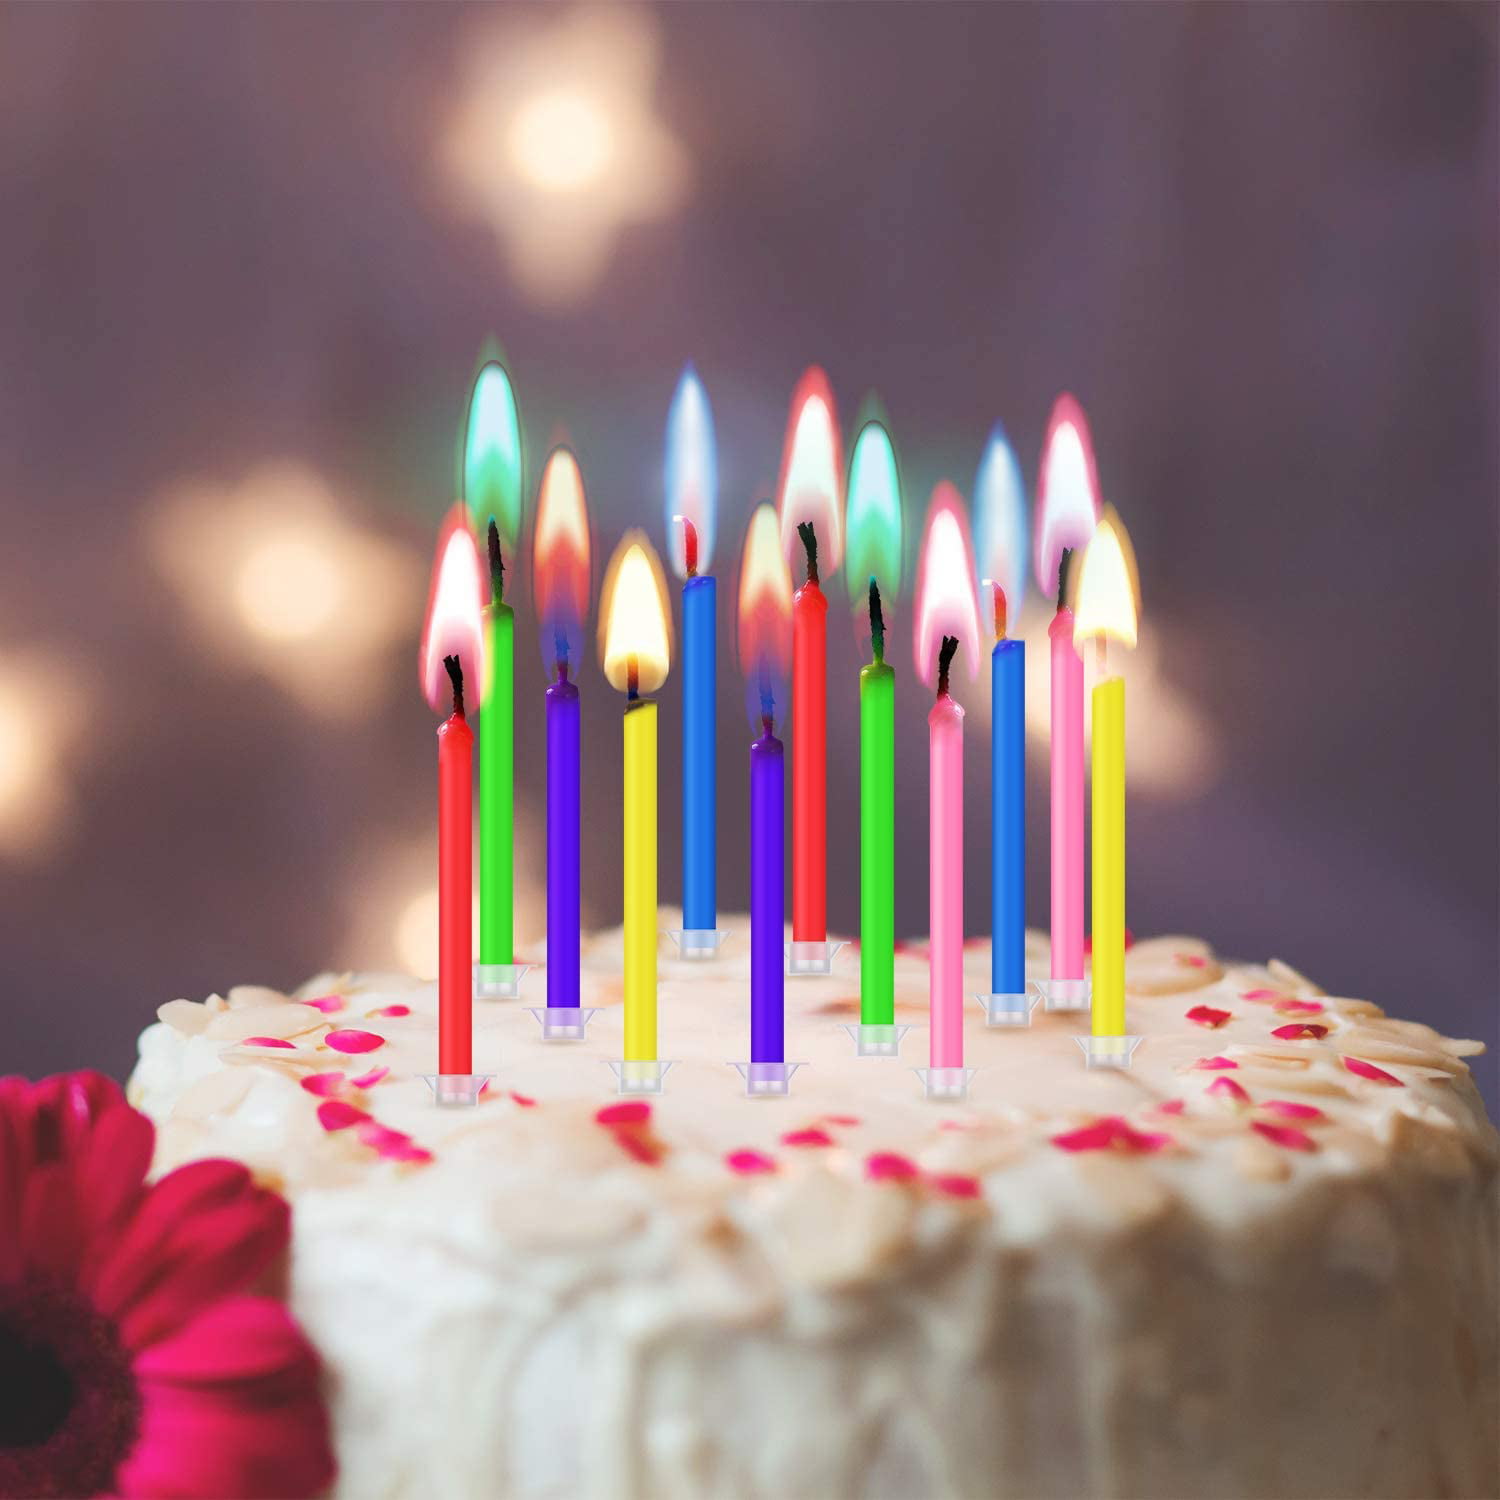 36 Pieces Birthday Cake Candles with Colored Flames Colorful Rainbow Candles in Holder for Birthday Cake Cupcake Decoration